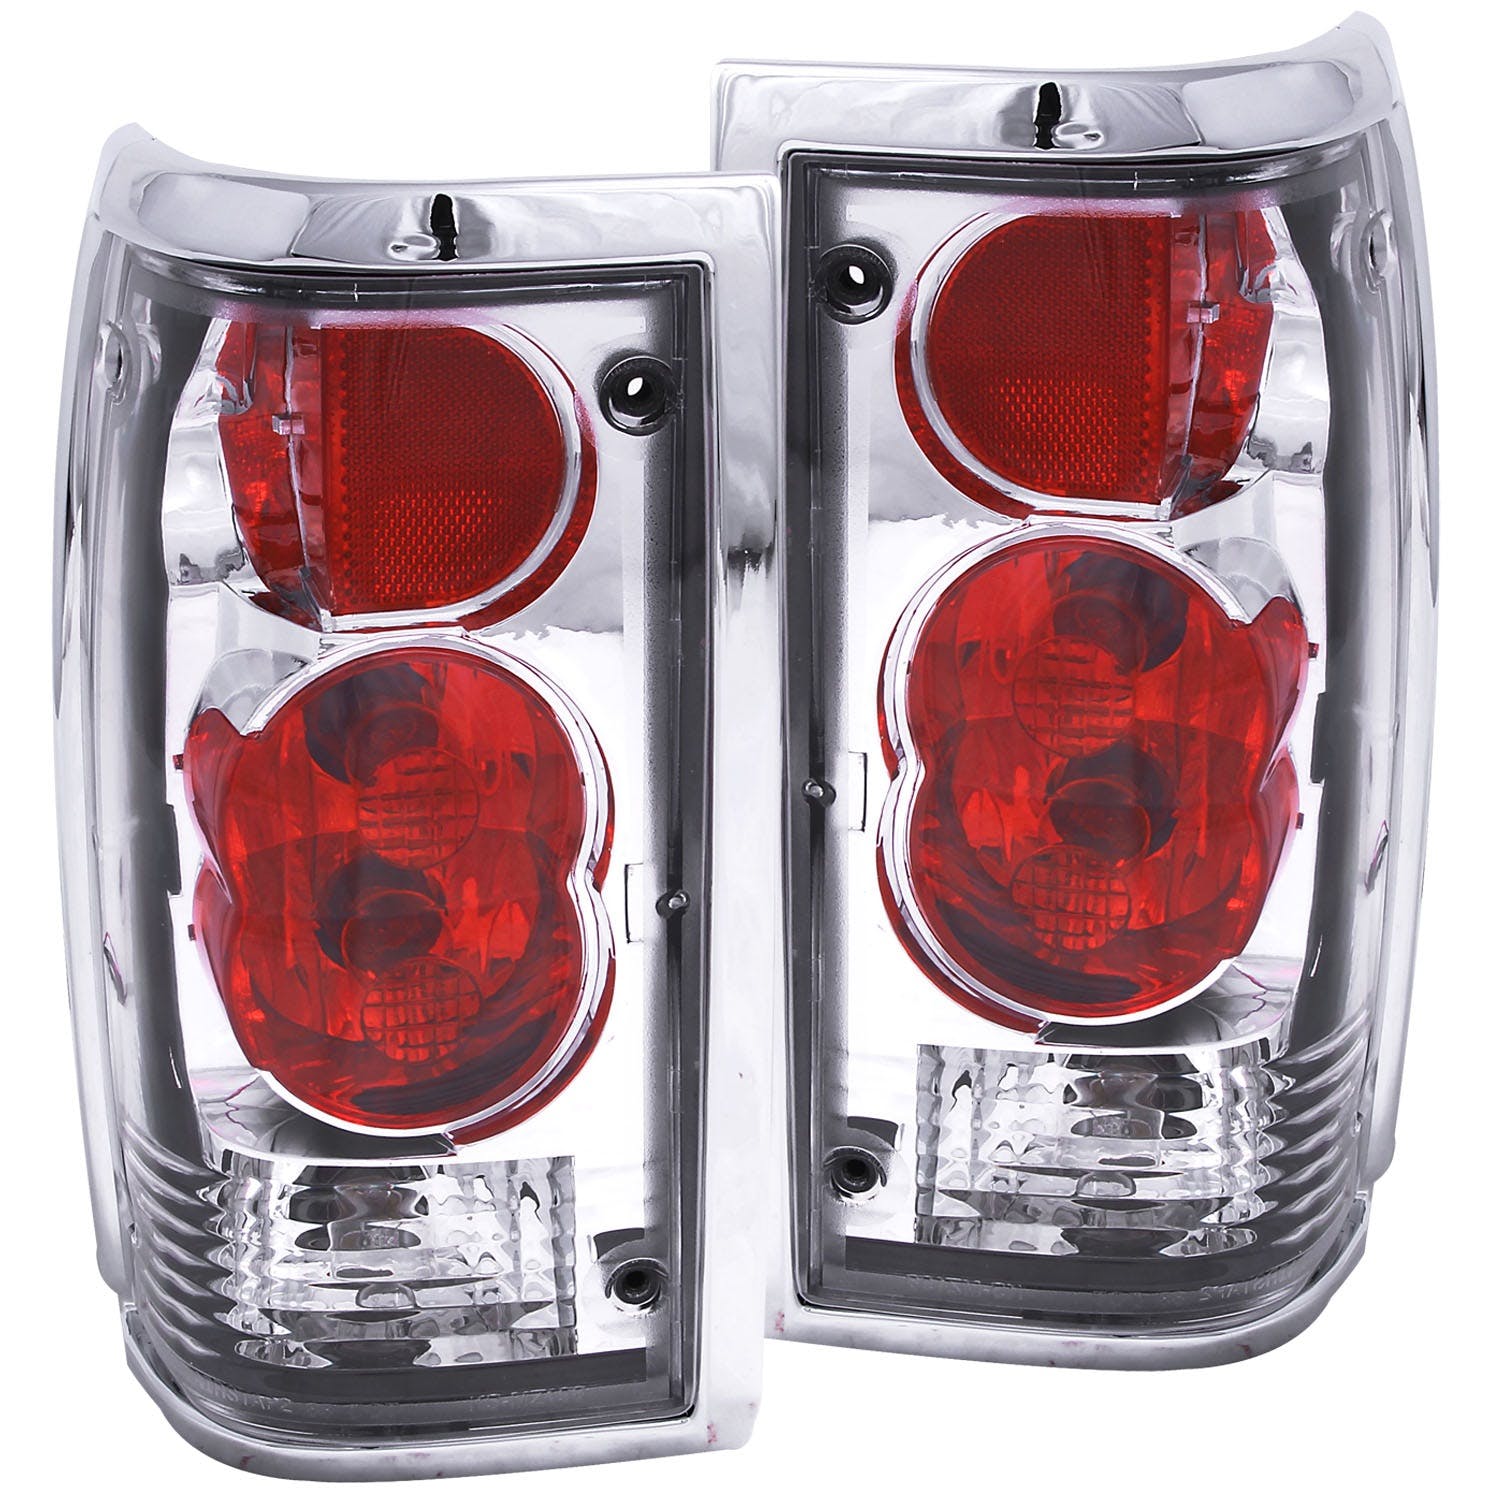 AnzoUSA 211111 Taillights Chrome